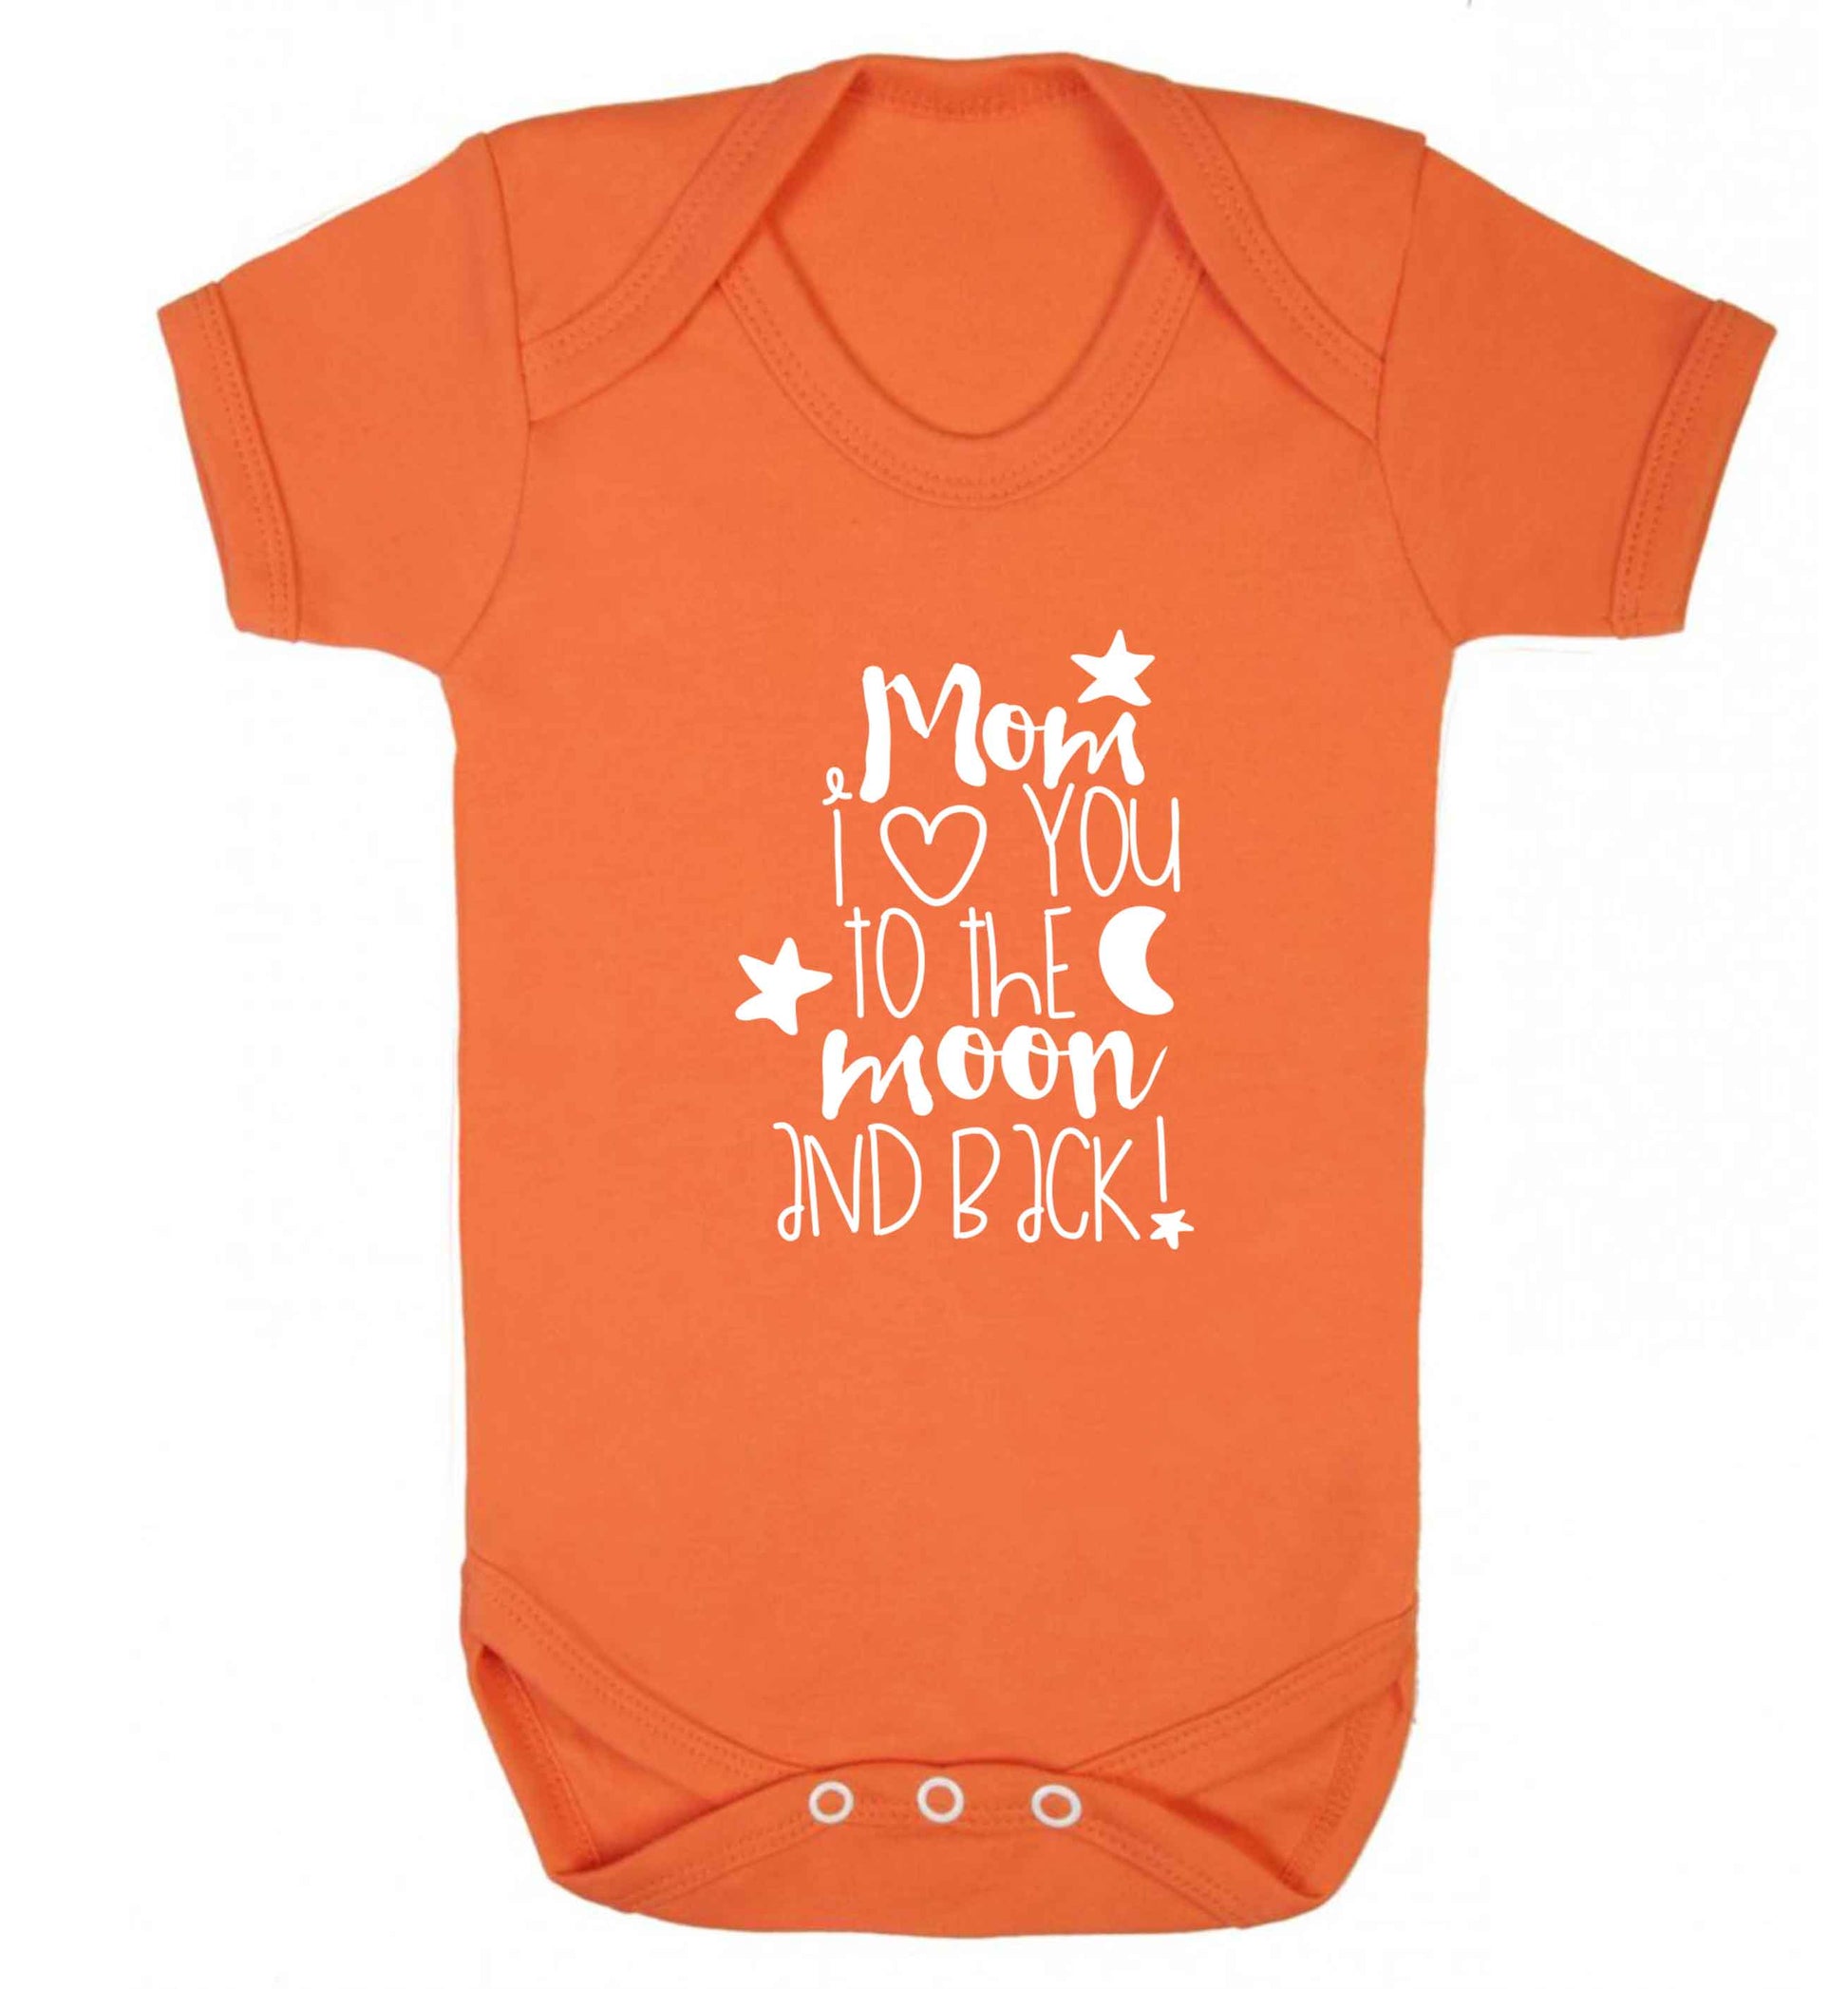 Mom I love you to the moon and back baby vest orange 18-24 months